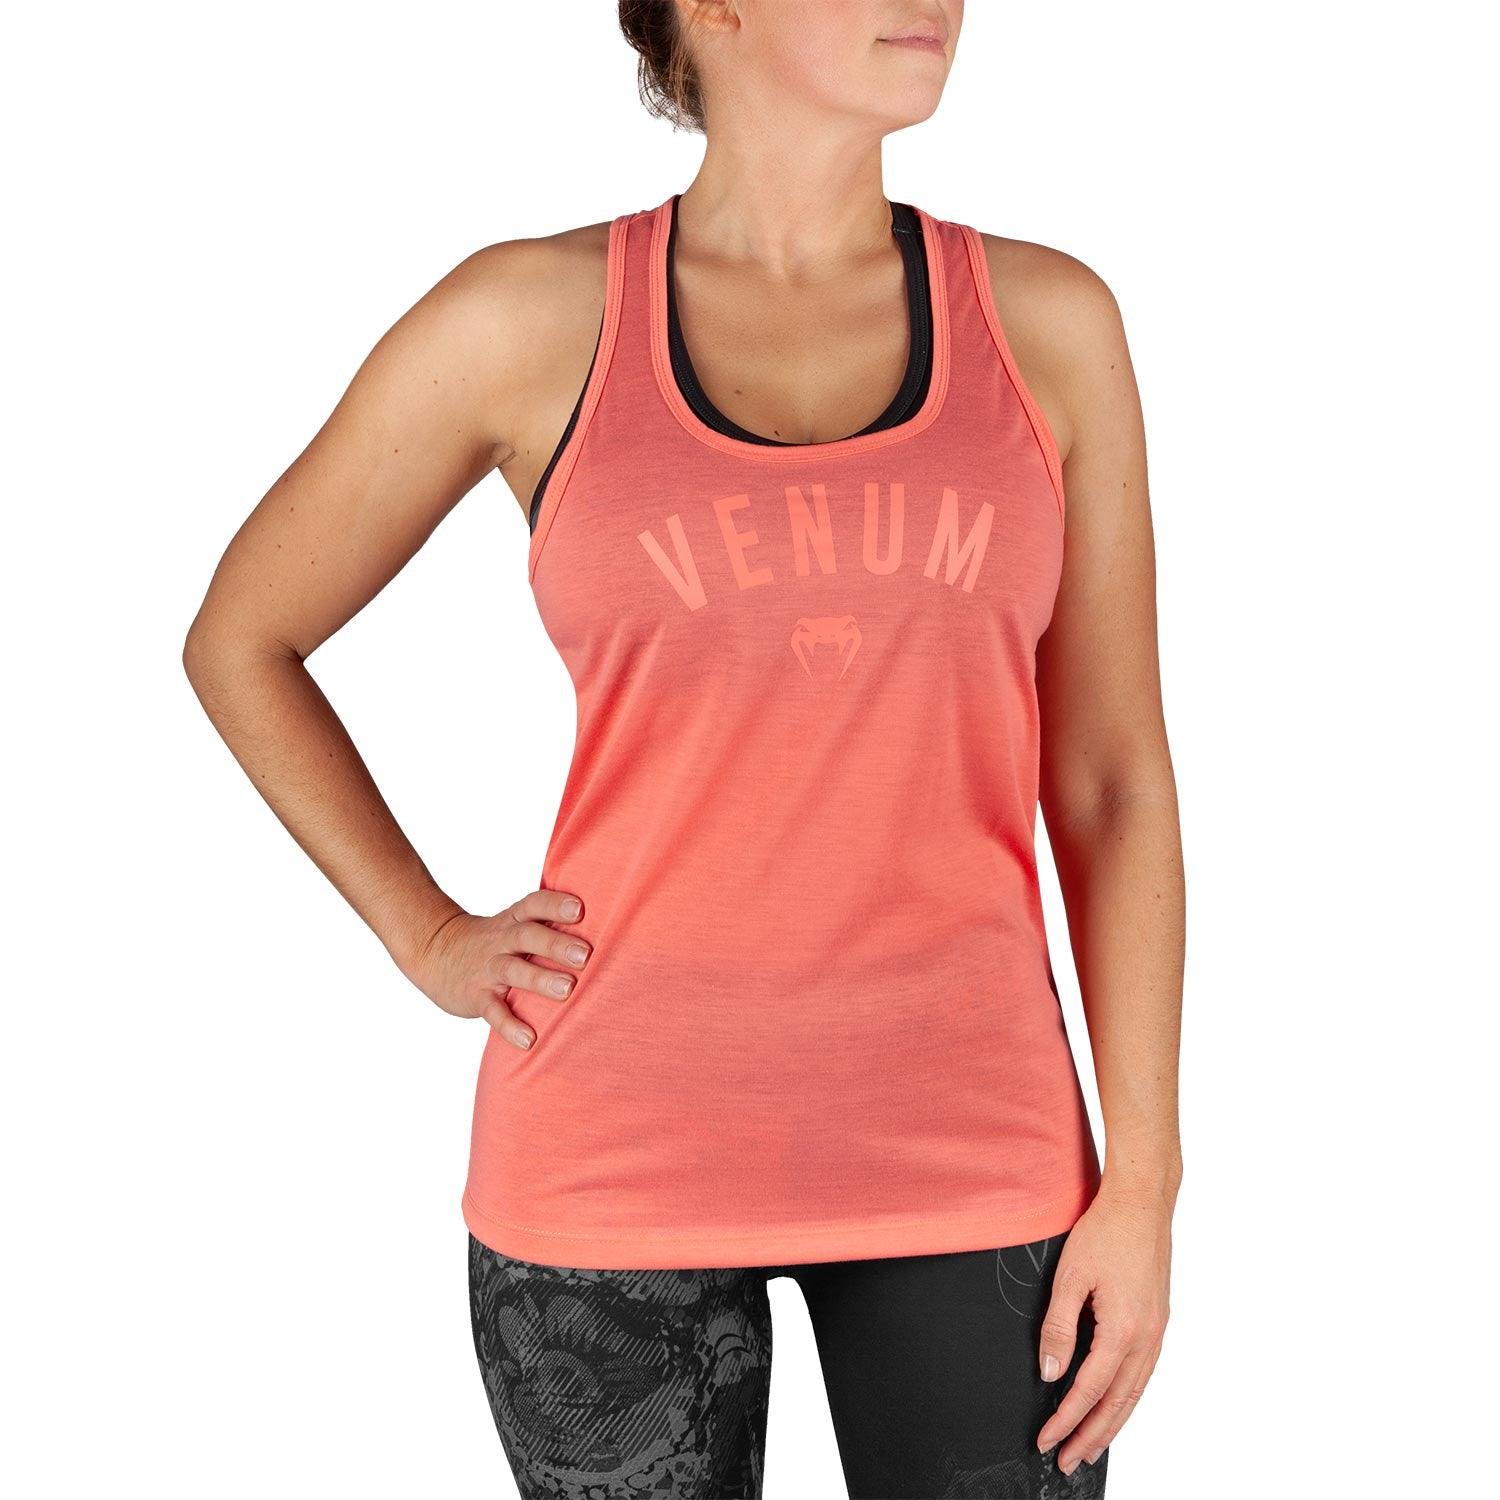 Venum Classic Tank Top - For Women - Pink Picture 1